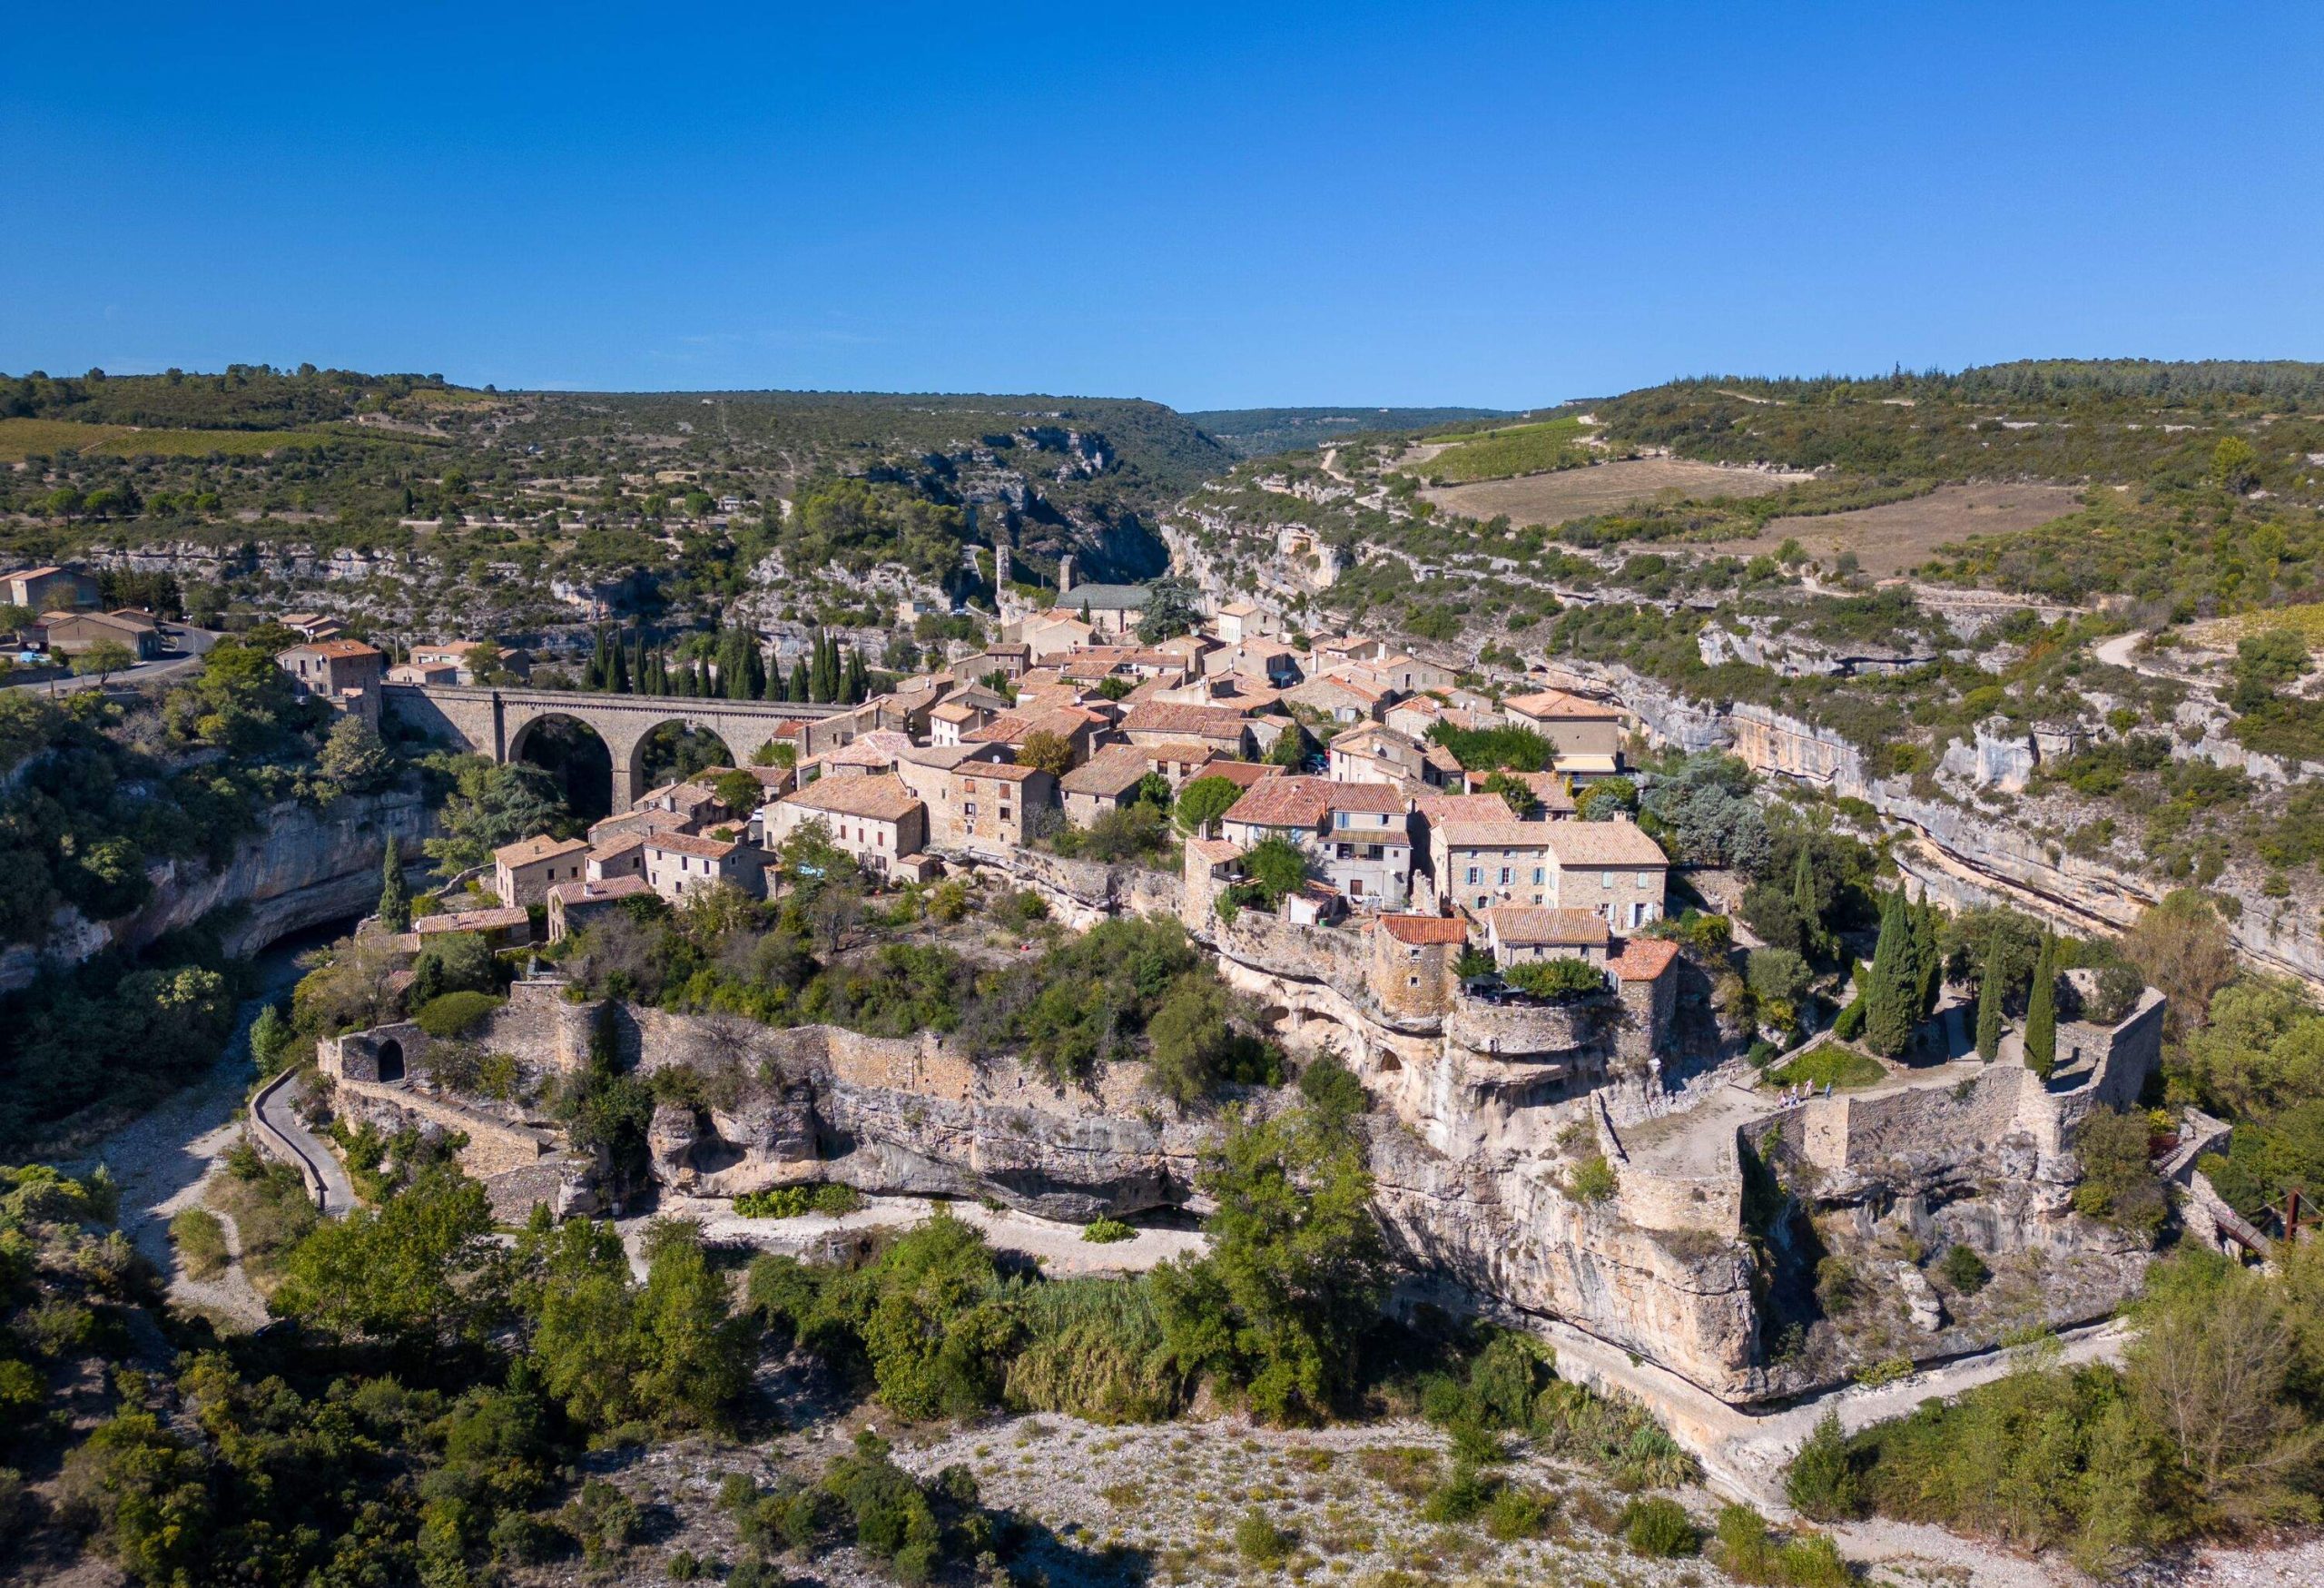 This aerial drone photo shows the small village of Minerve in the region of Beziers. The town is known for the canyon that goes around the town which was created by the river La Cesse.